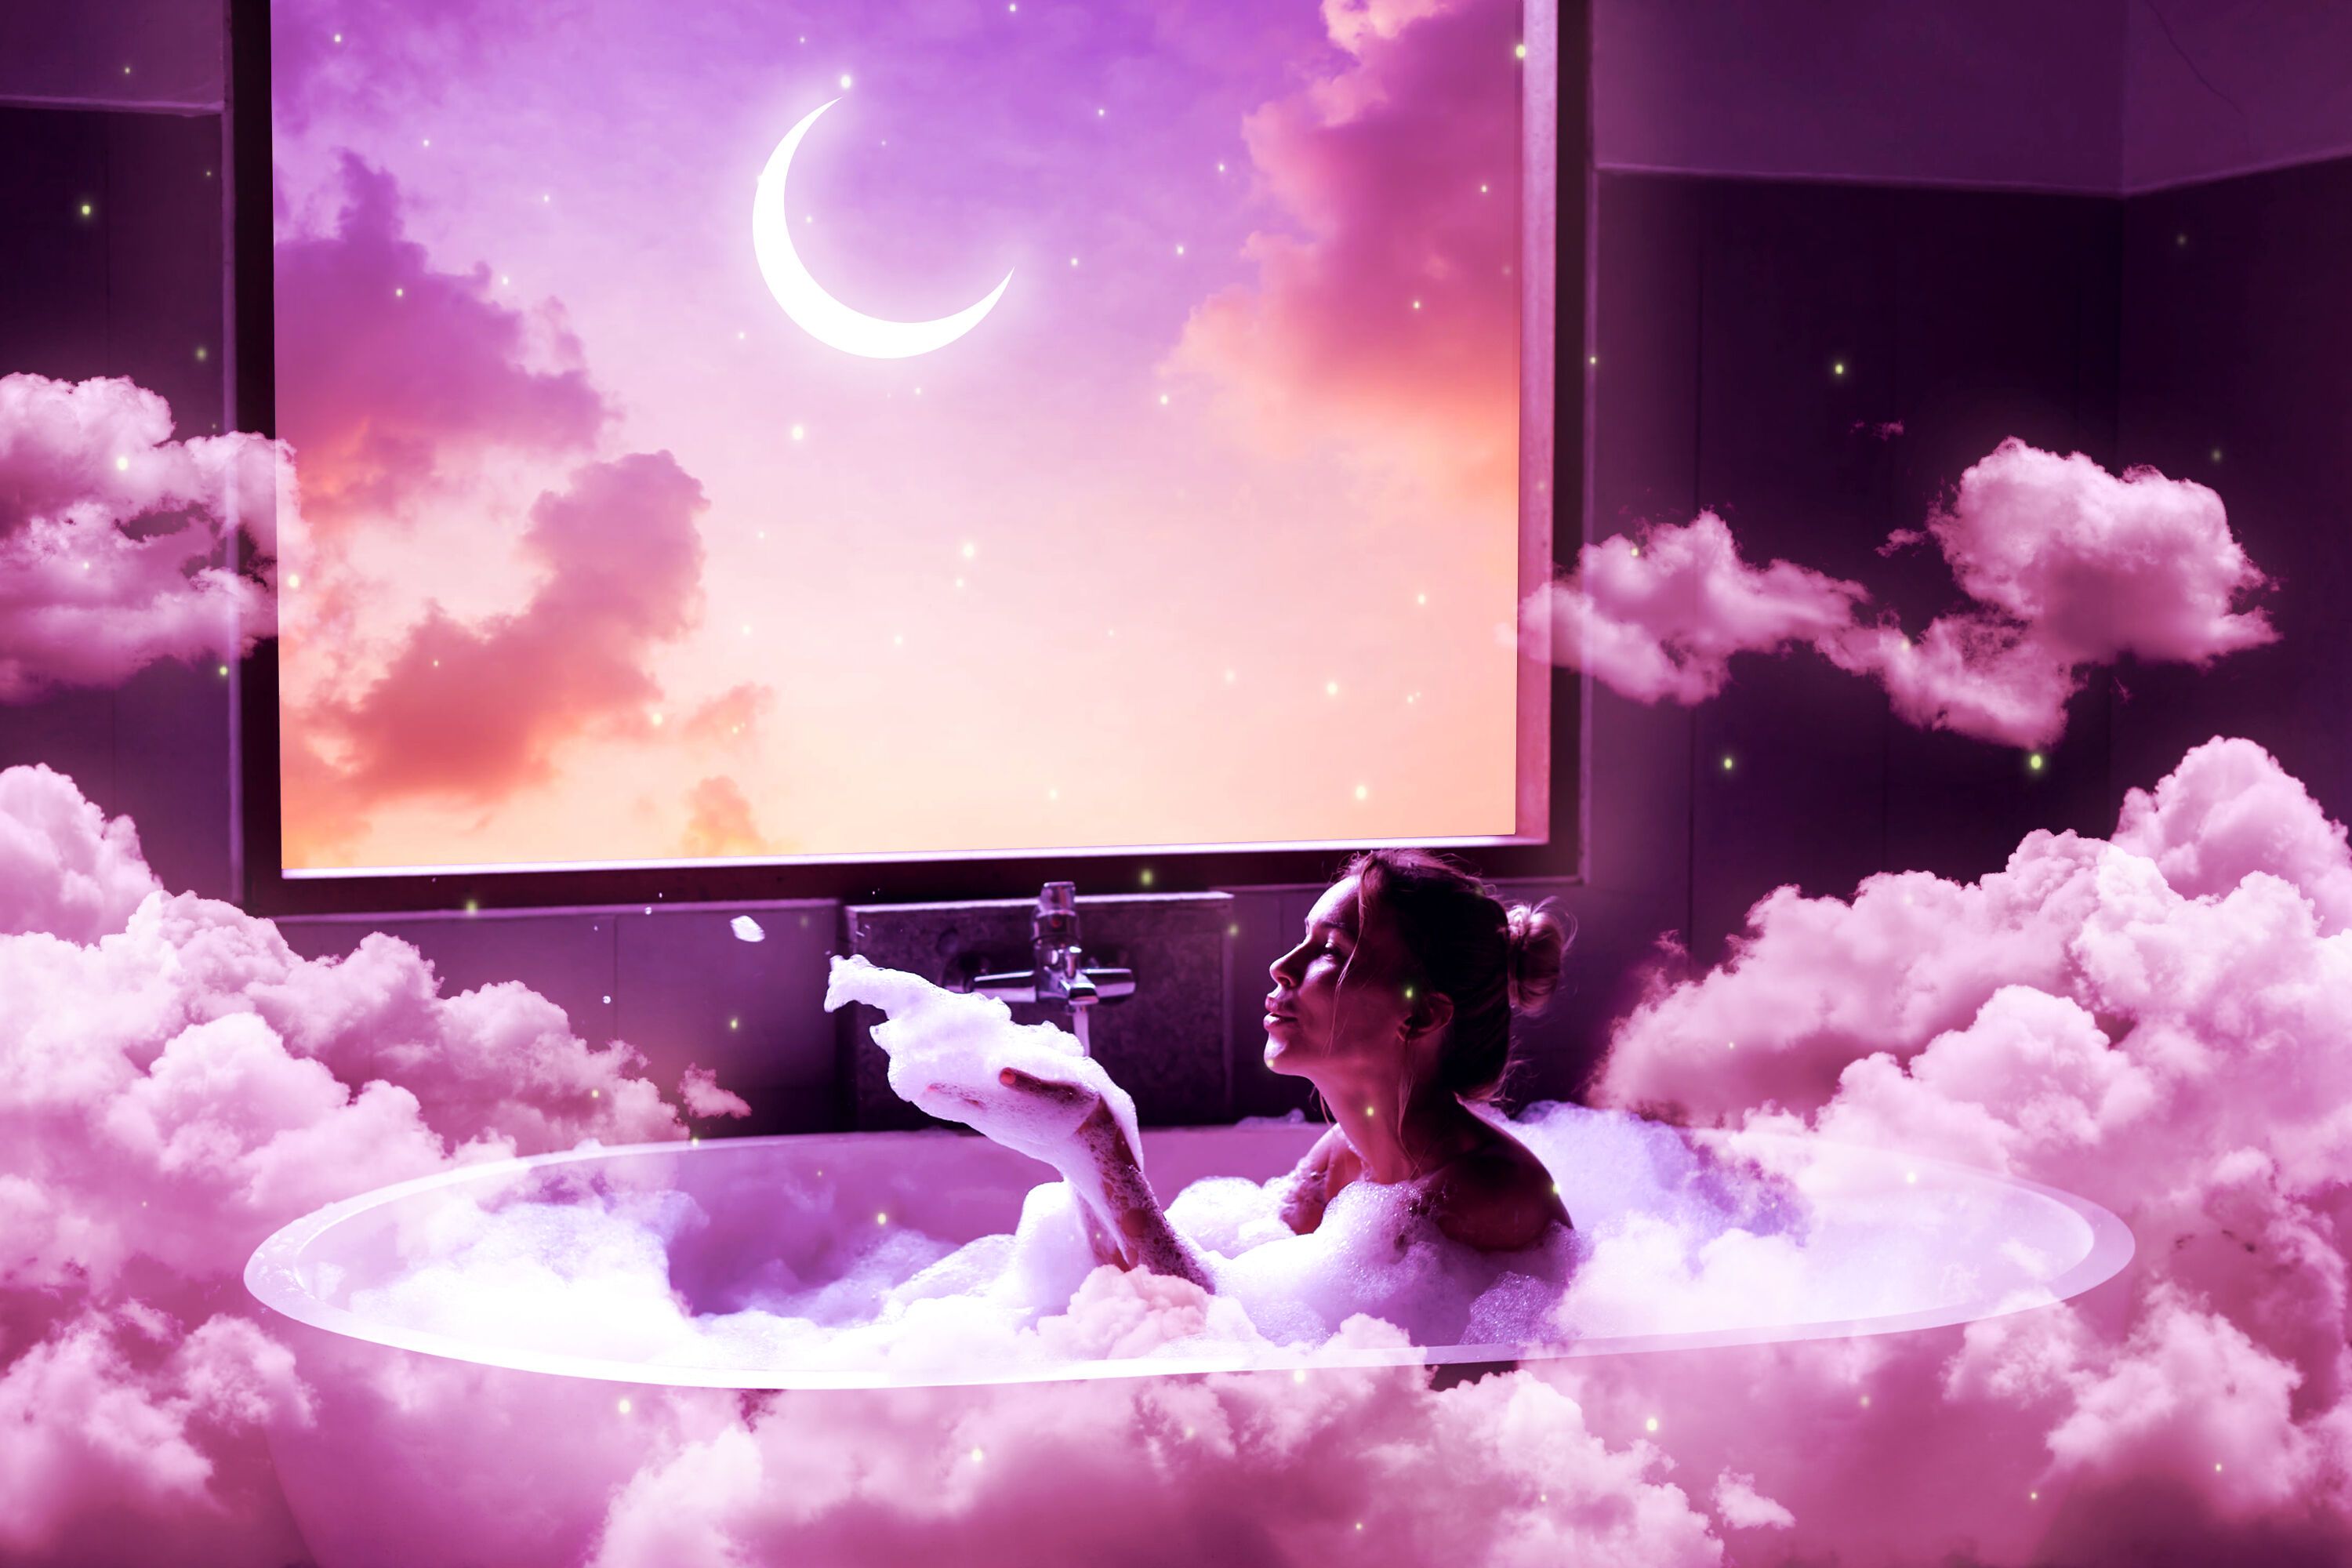 A woman in the bathtub with clouds and moon - Weirdcore